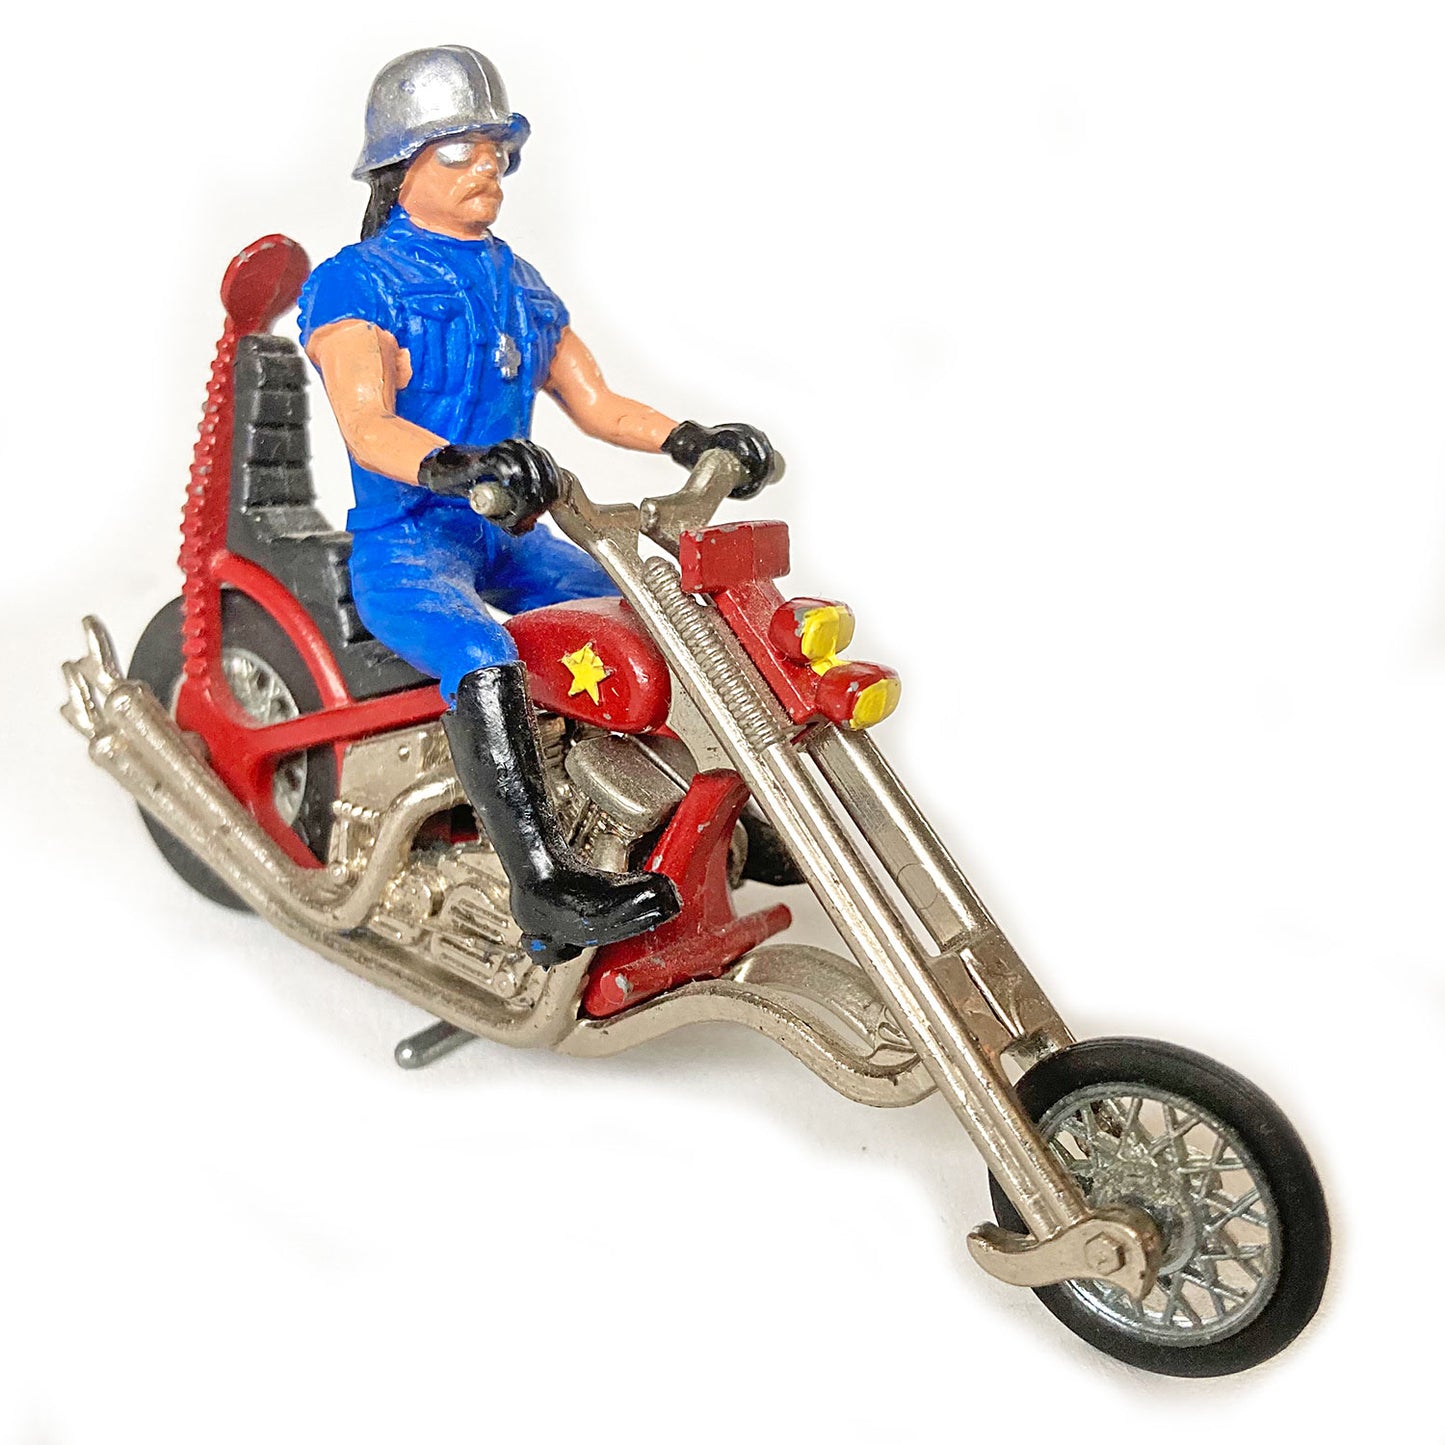 Britains diecast Long Fork Chopper motorcycle toy, boxed, late 1960s/early 1970s